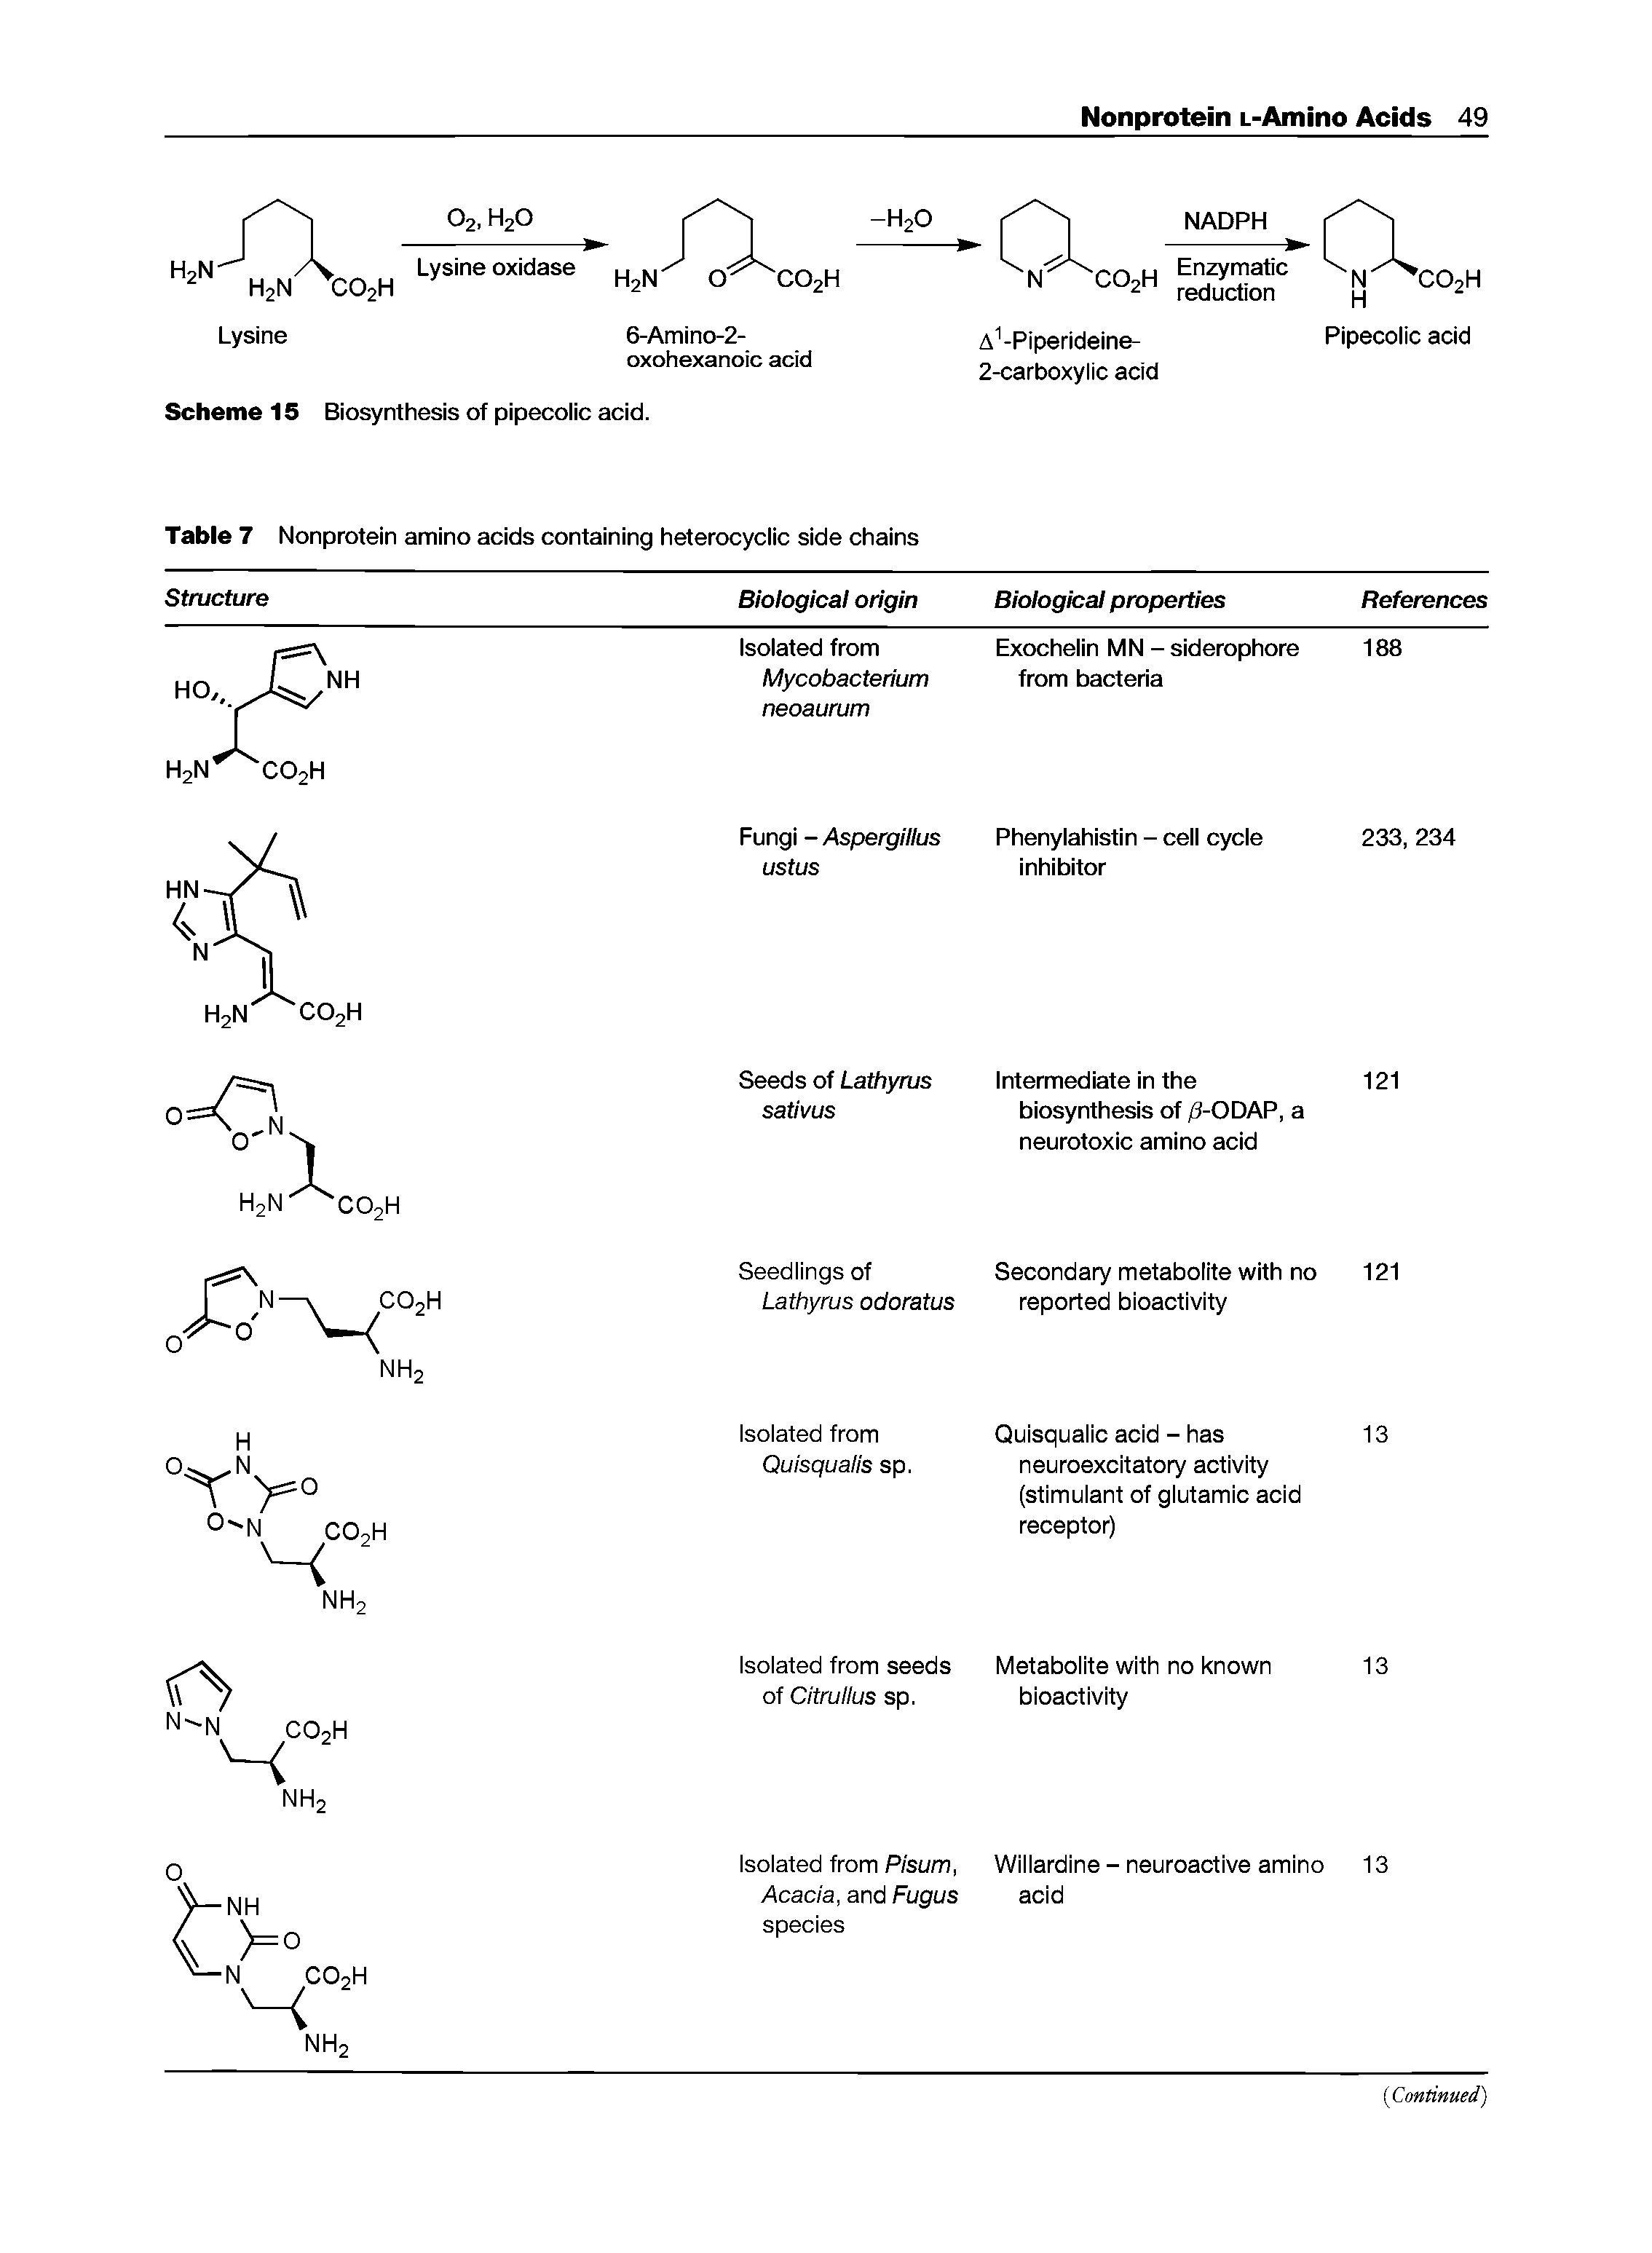 Table 7 Nonprotein amino acids containing heterocyclic side chains...